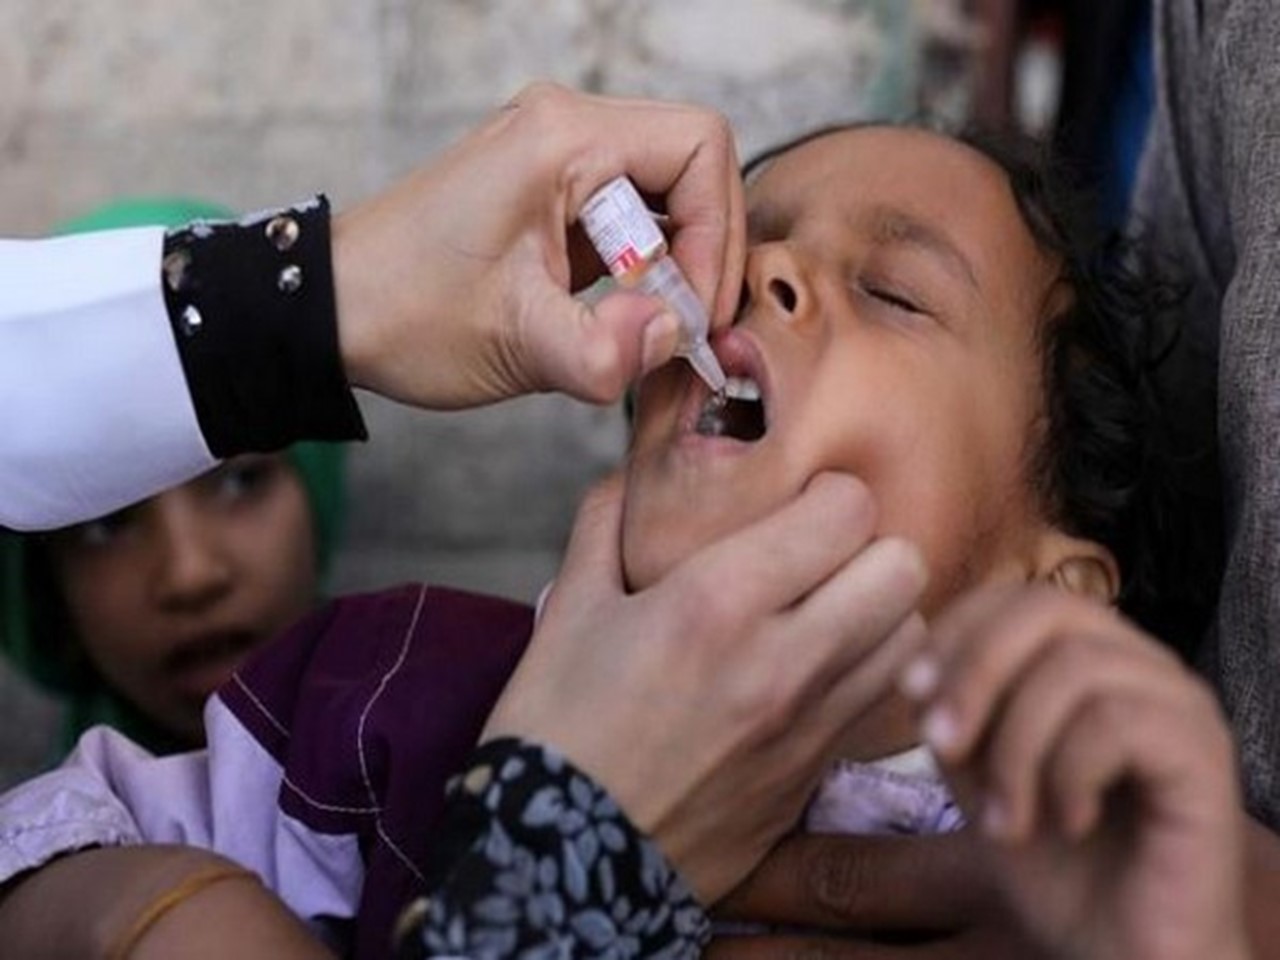 Health News Roundup: More bumps in the road to wiping out polio